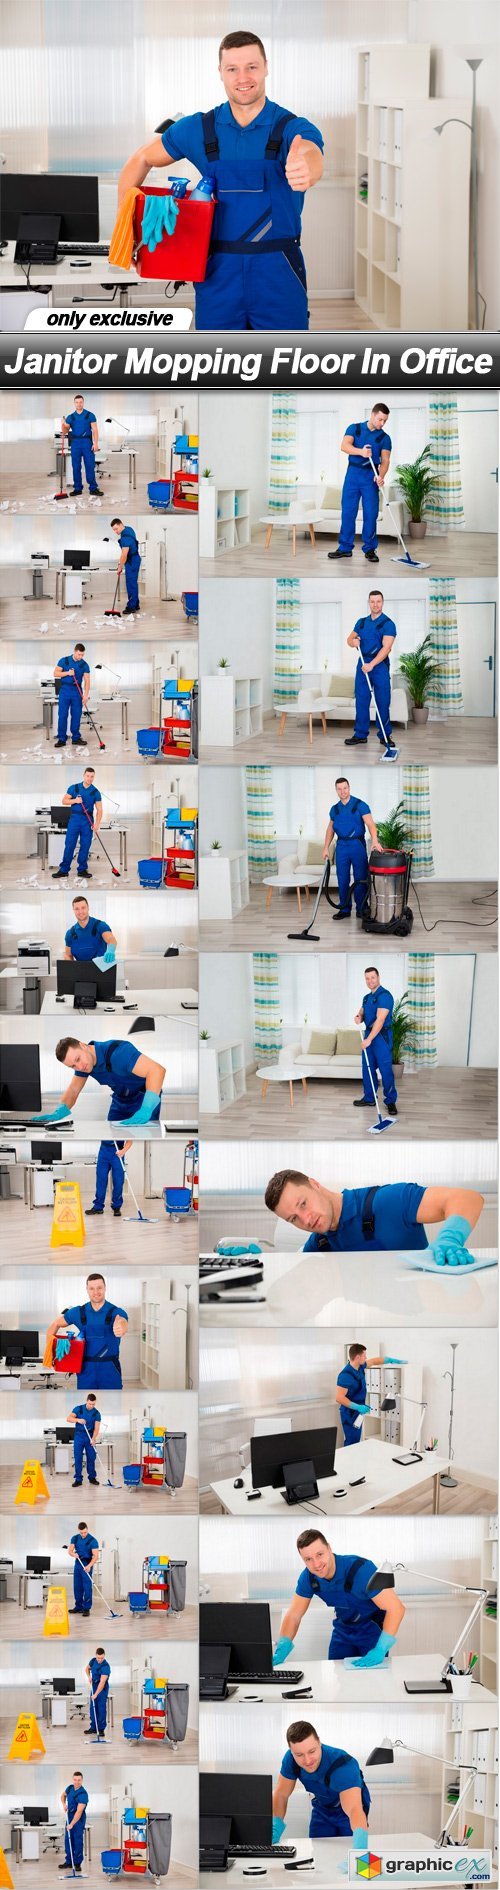 Janitor Mopping Floor In Office - 20 UHQ JPEG